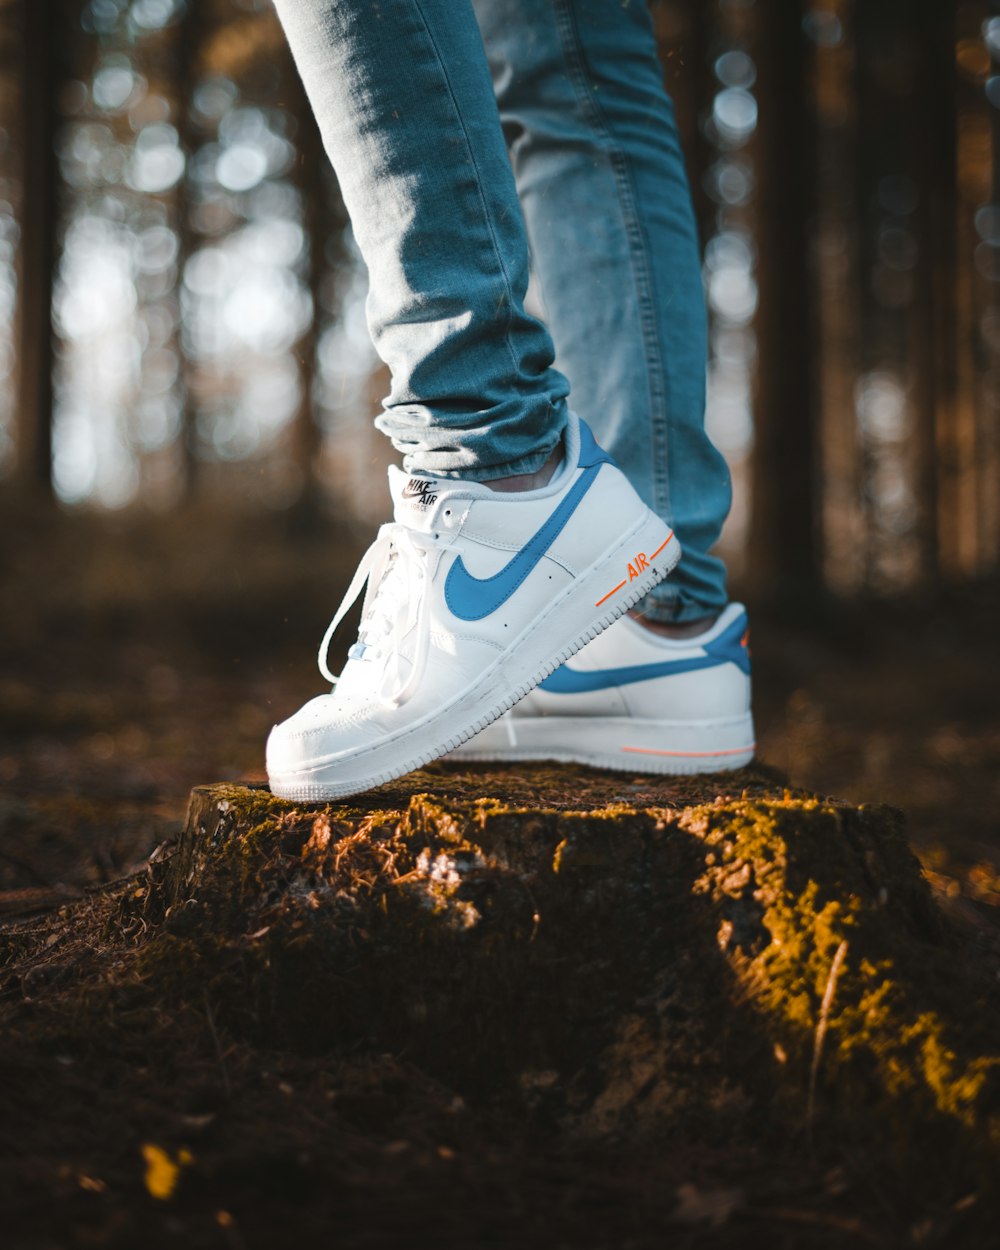 person wearing blue denim jeans and white Nike Air Max shoes standing on  tree stomp photo – Free Made Image on Unsplash